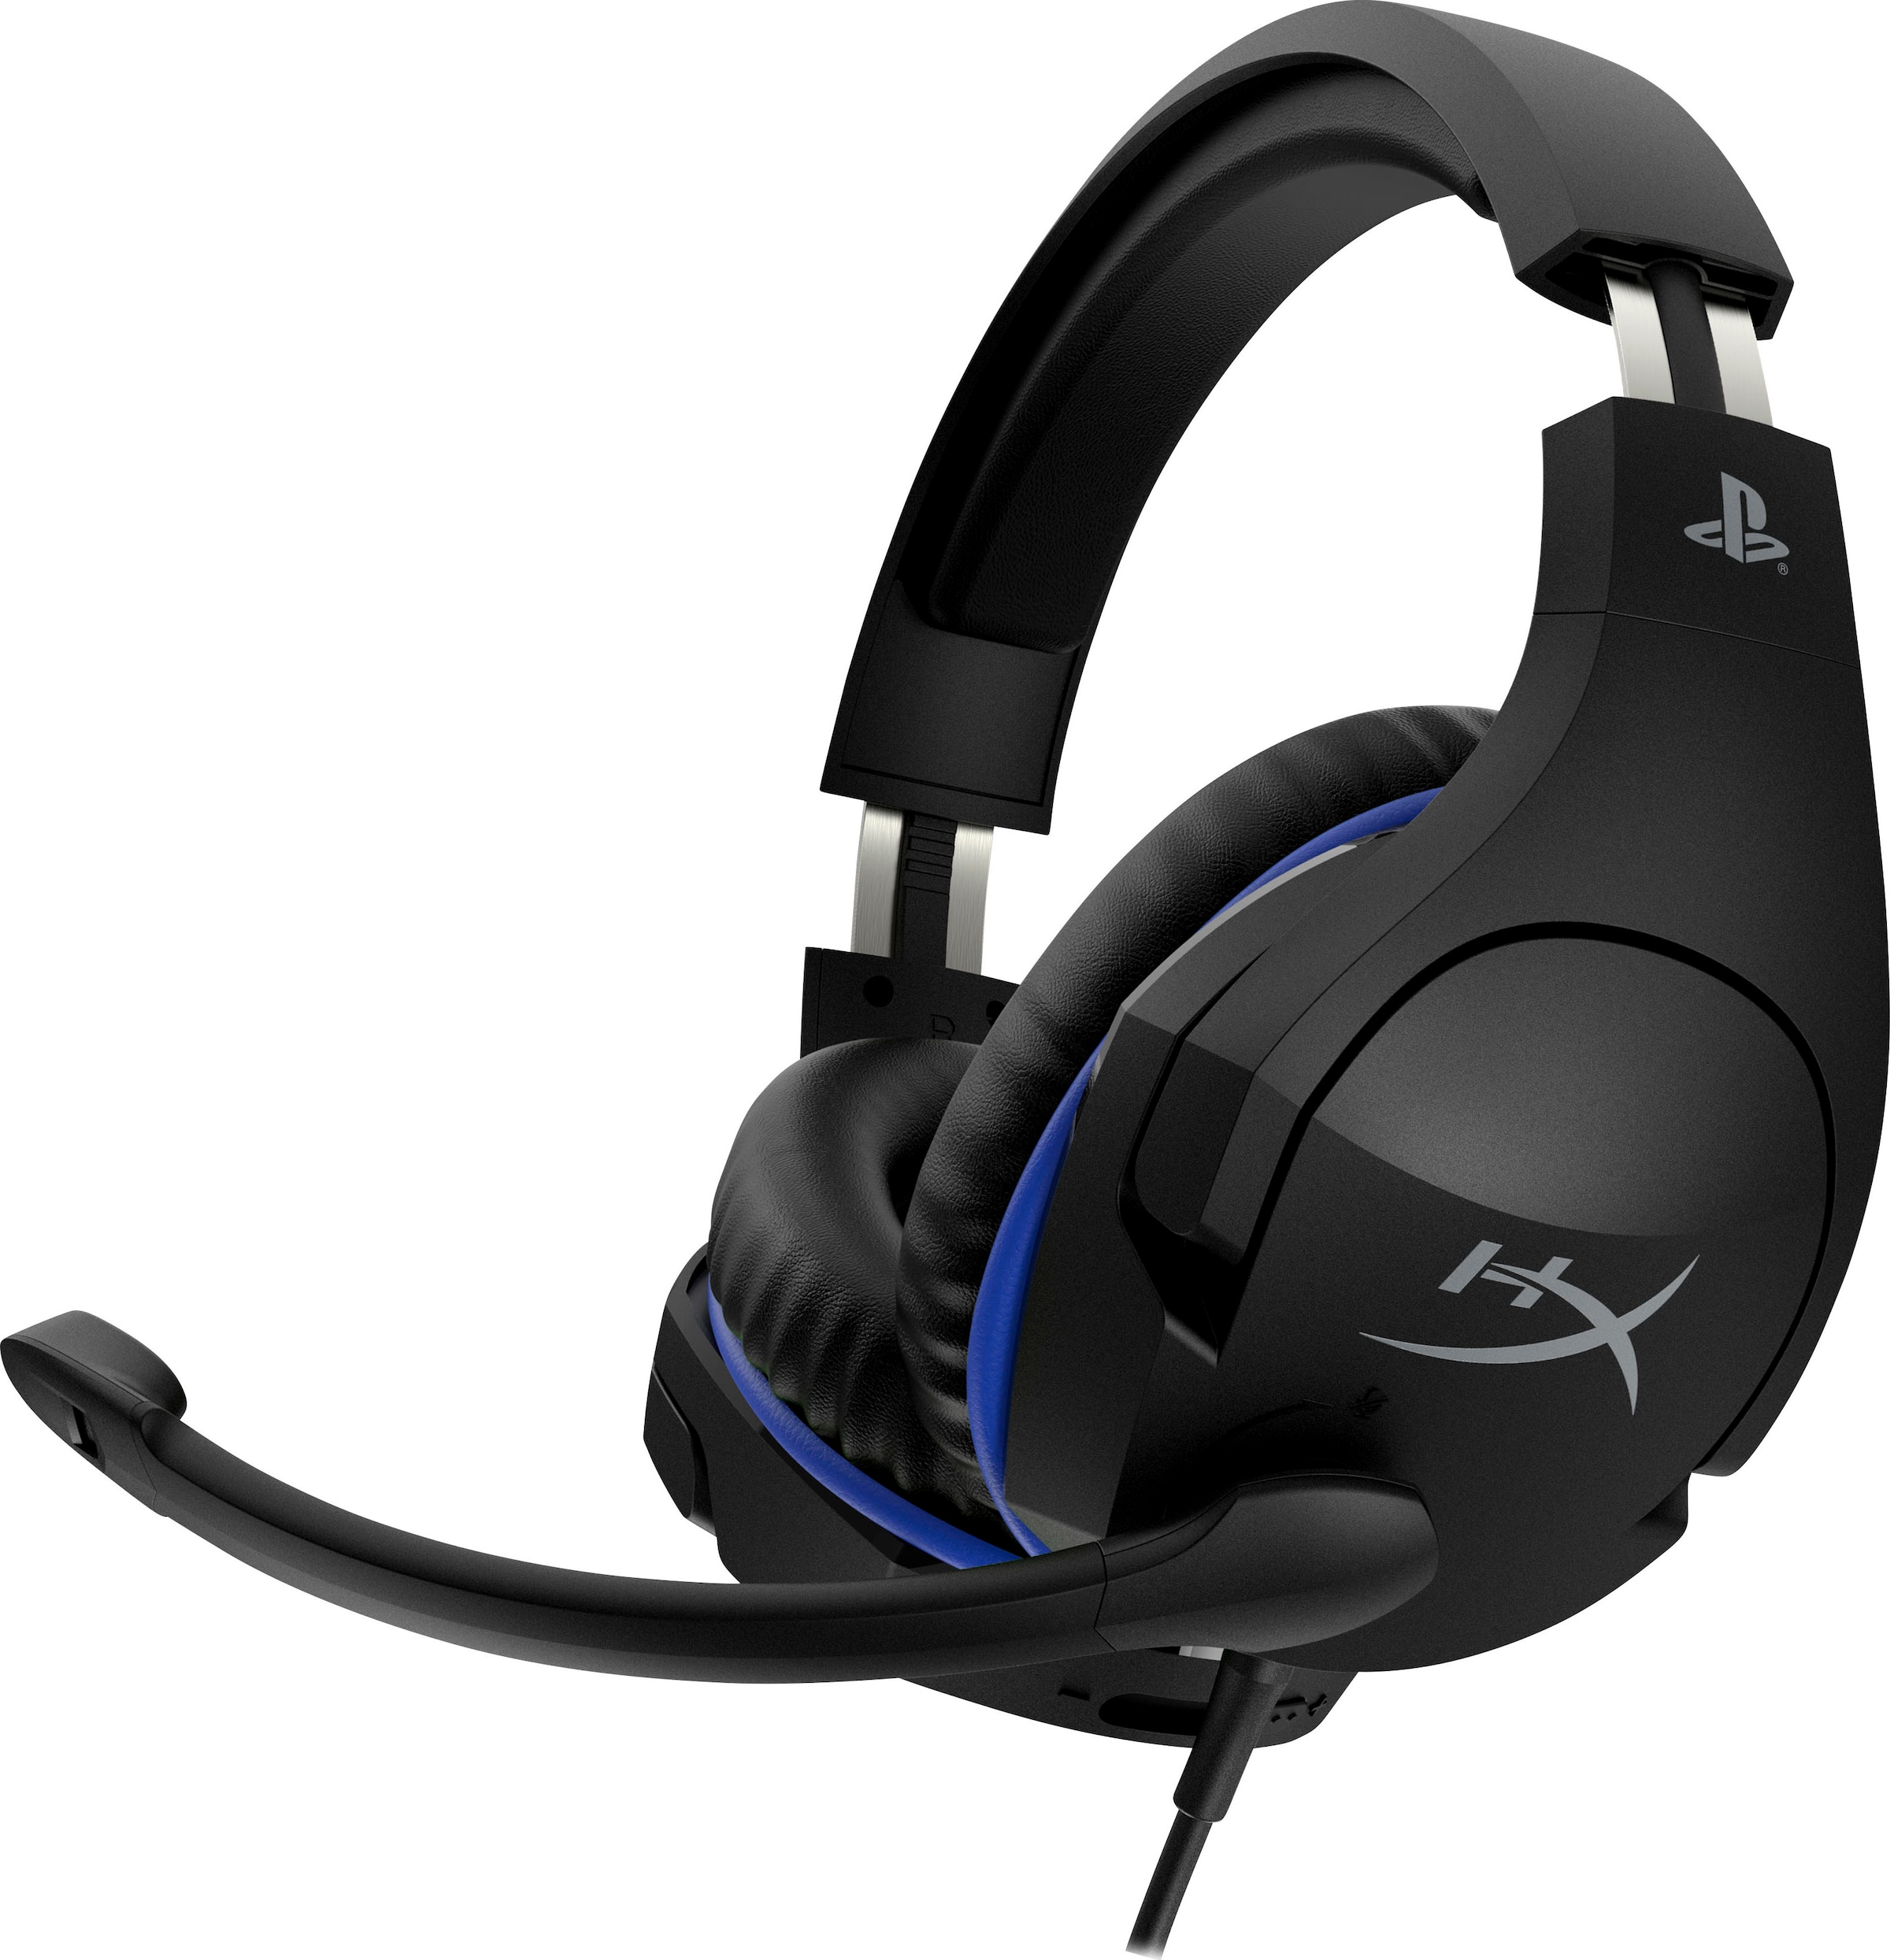 Licensed)«, jetzt abnehmbar »Cloud Gaming-Headset (PS4 Mikrofon Stinger HyperX bei OTTO